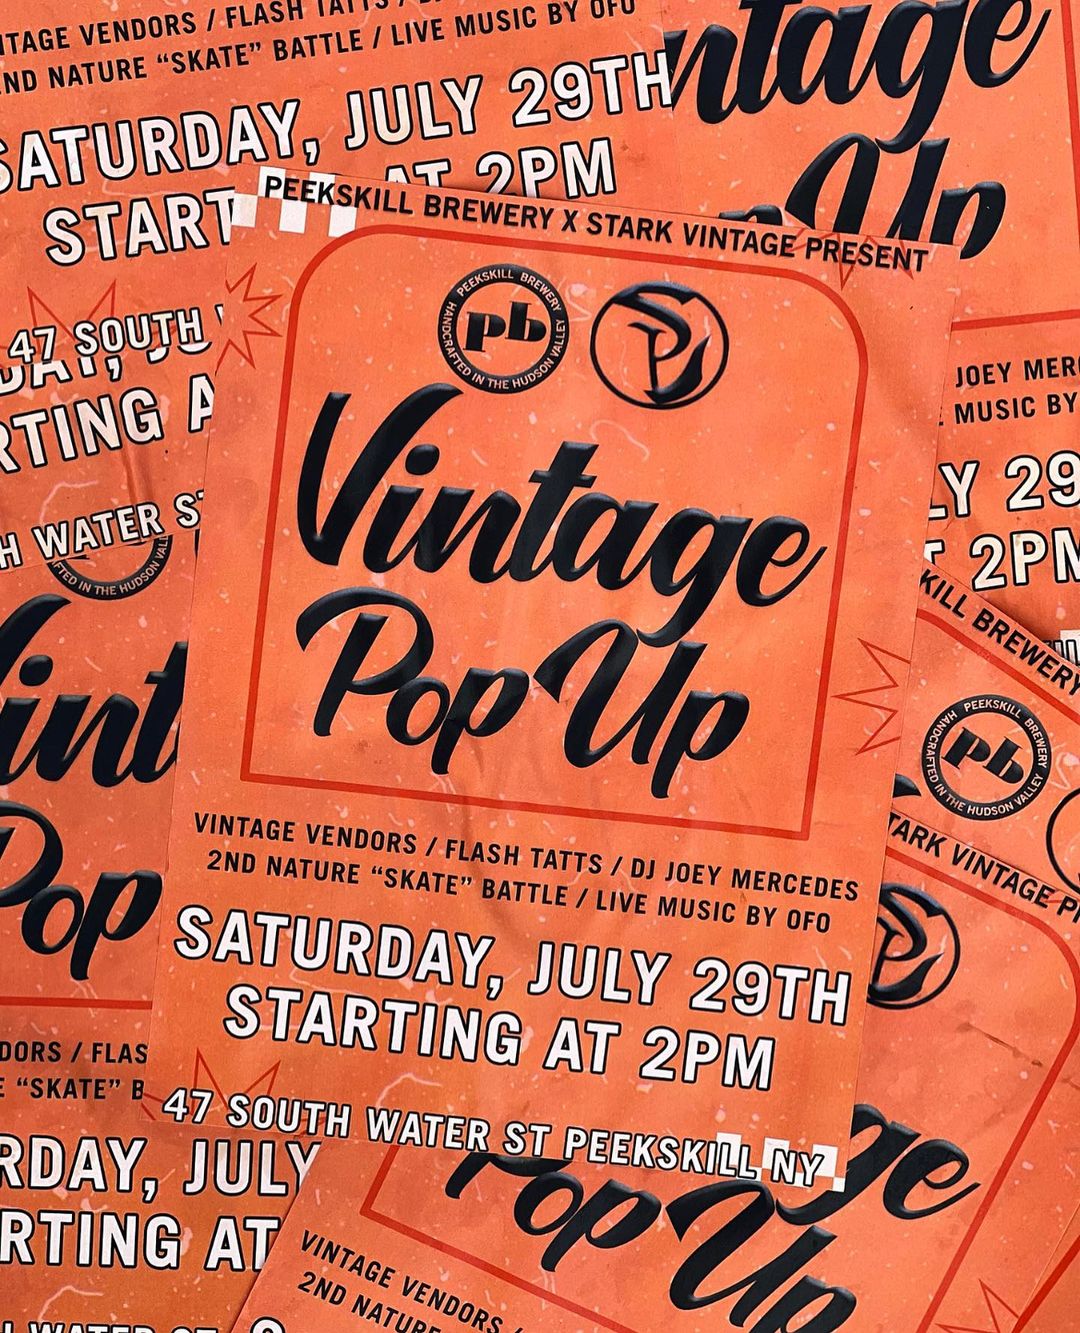 Flier for Peekskill Brewery and Stark Vintage Vintage Pop Up event